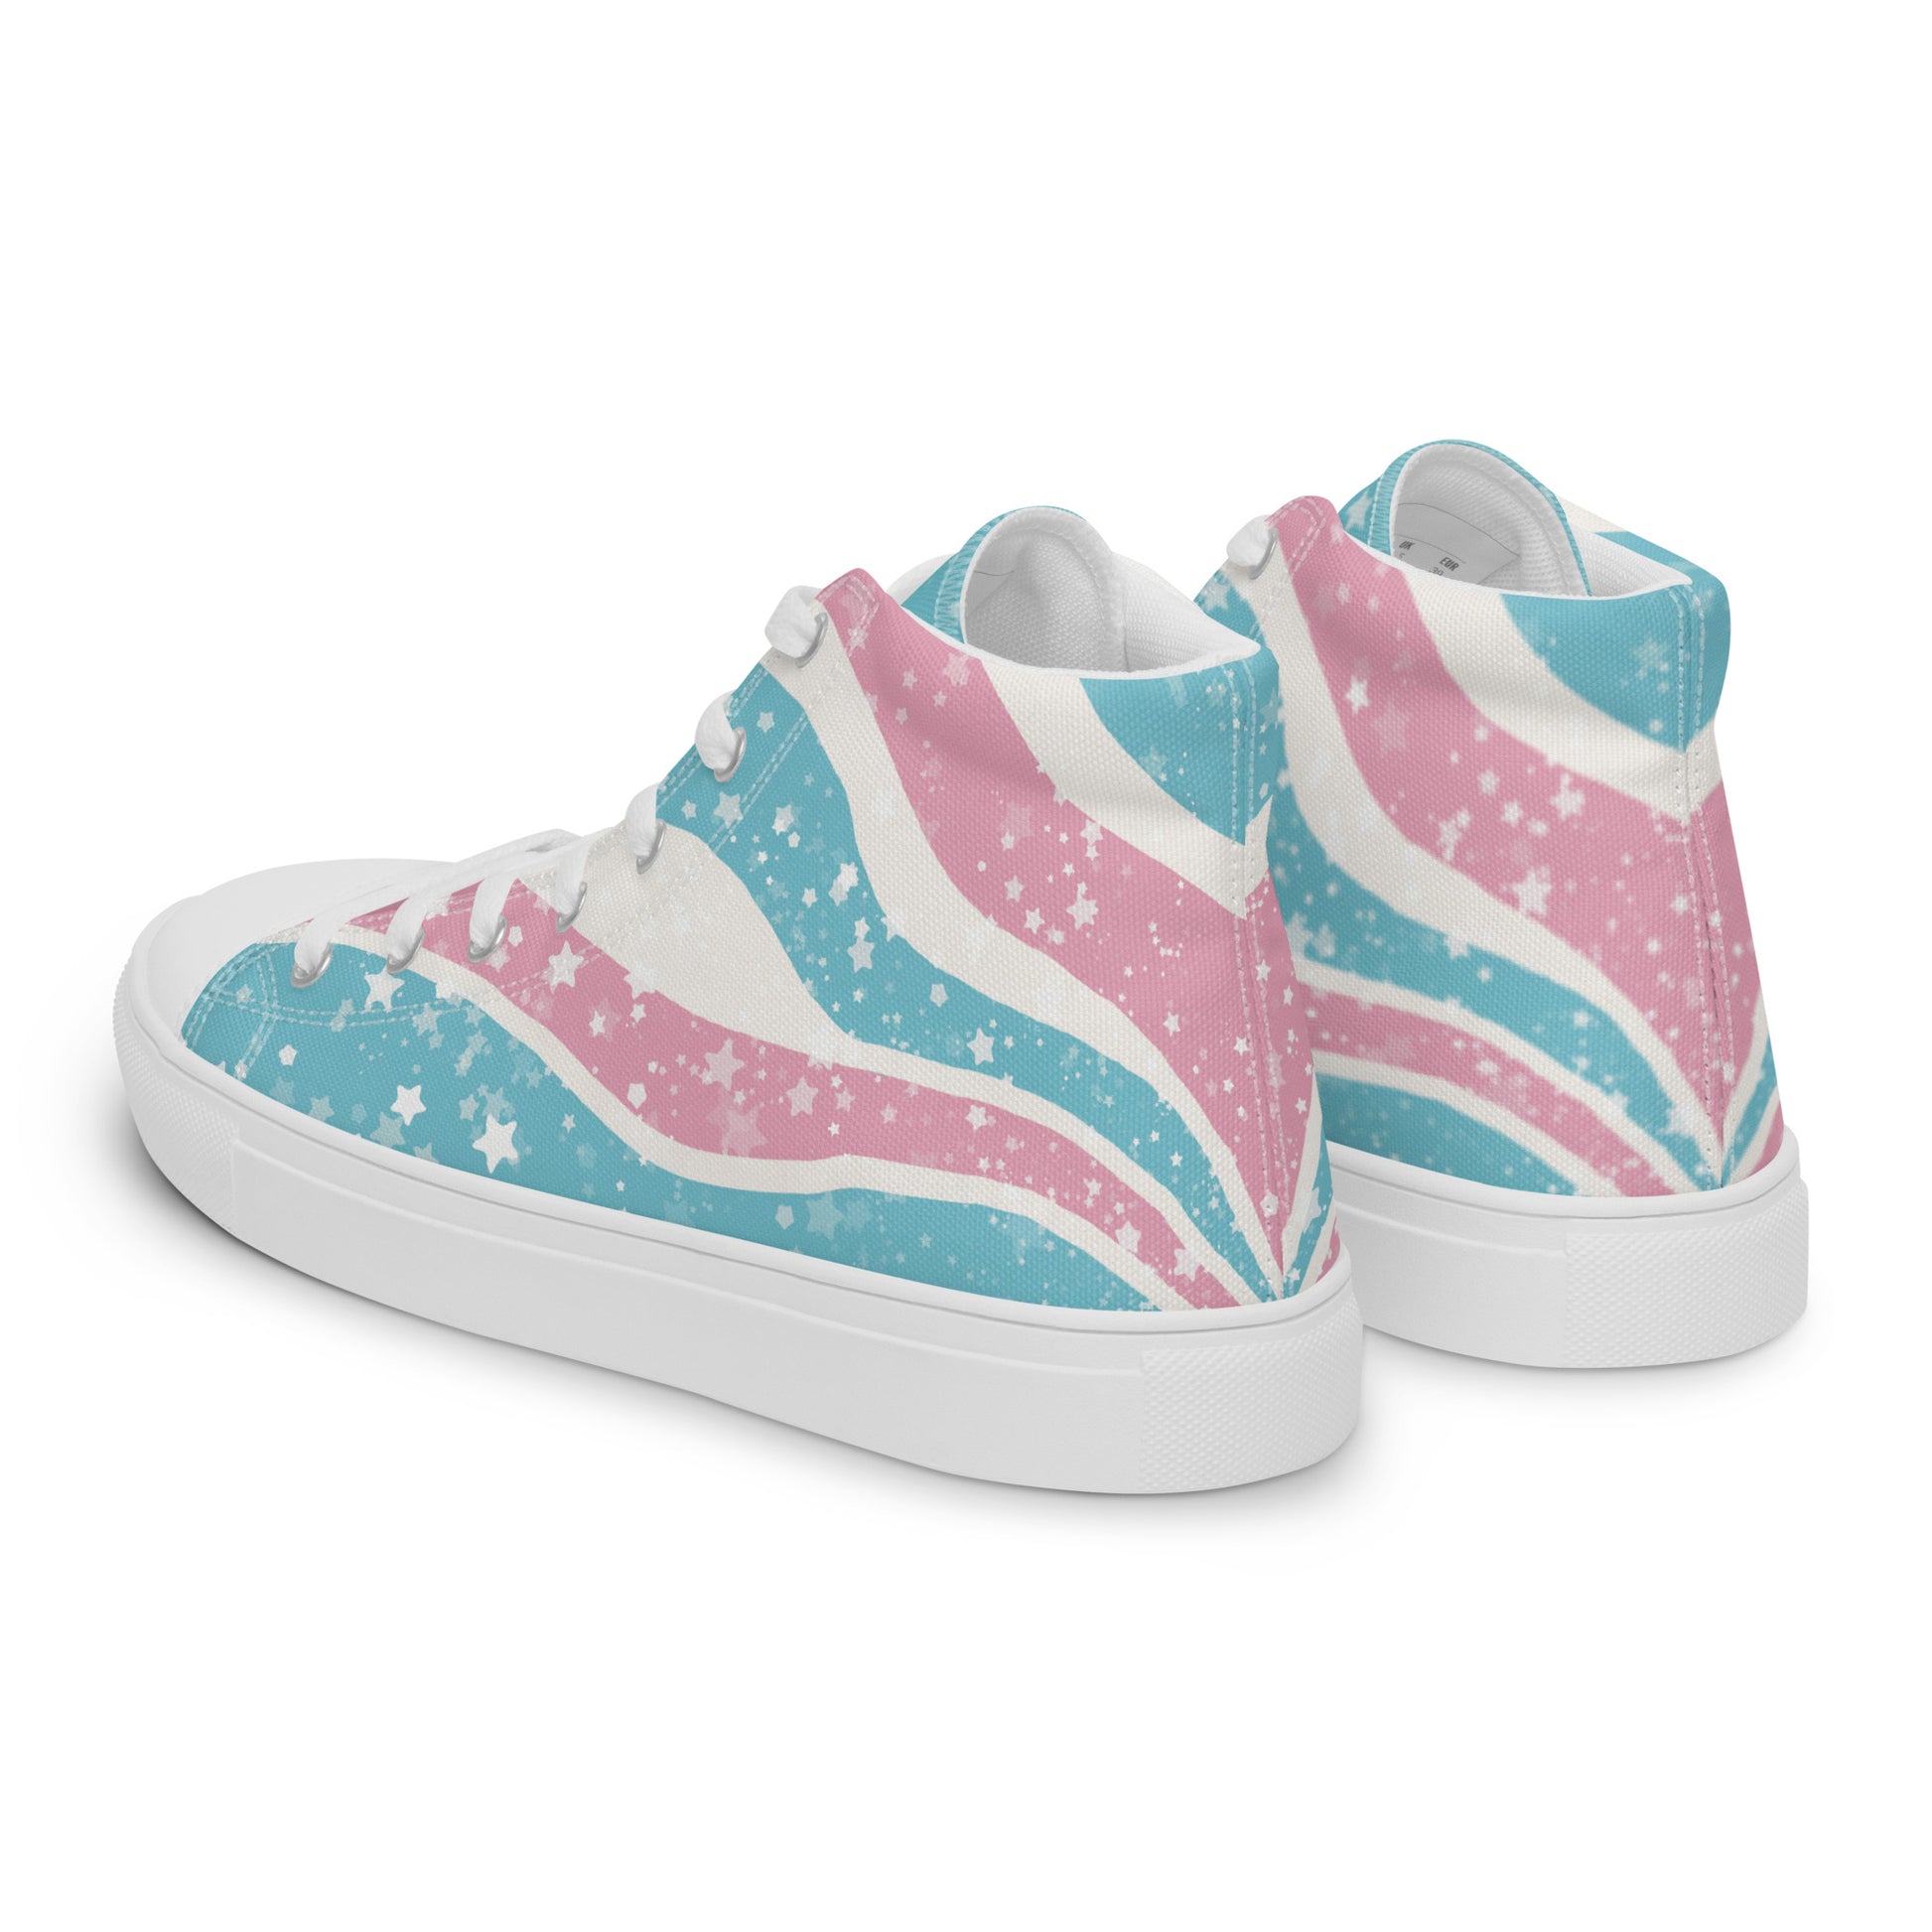 Left back view: A pair of high top shoes have way lines starting from the heel and getting larger towards the laces in pink, white, and blue with white stars all over, white laces, and white details.